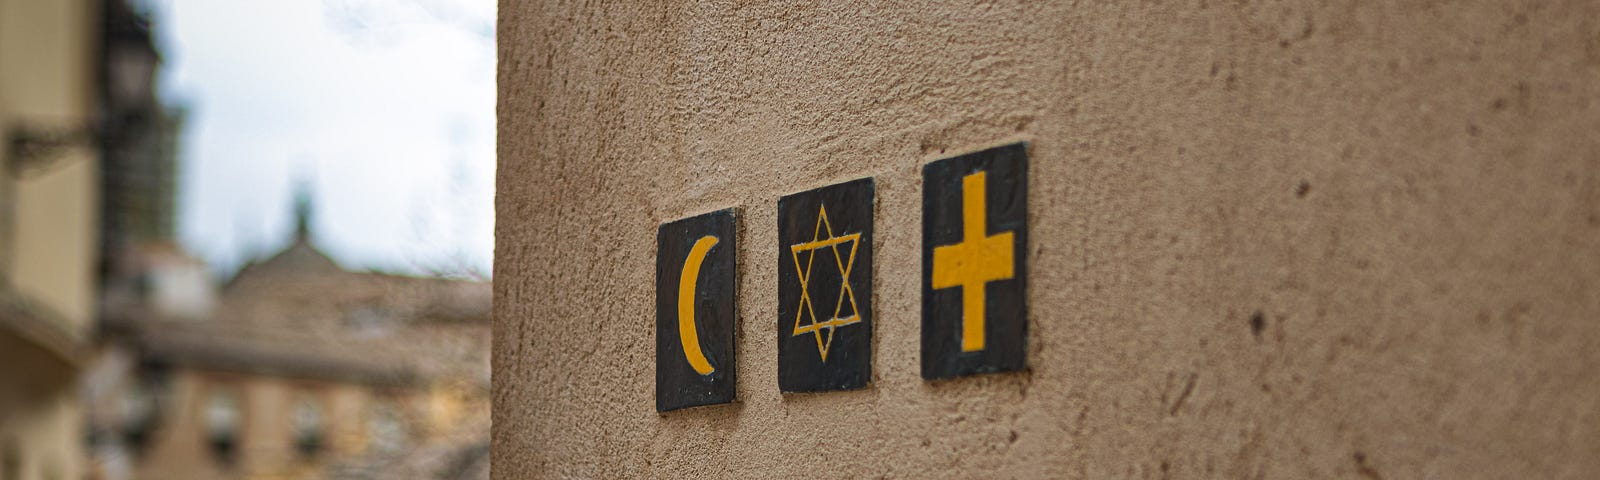 The crescent moon symbol of Islam, the star of David symbol of Judaism, and the cross symbol of Christianity on the side of a brown, mud wall.